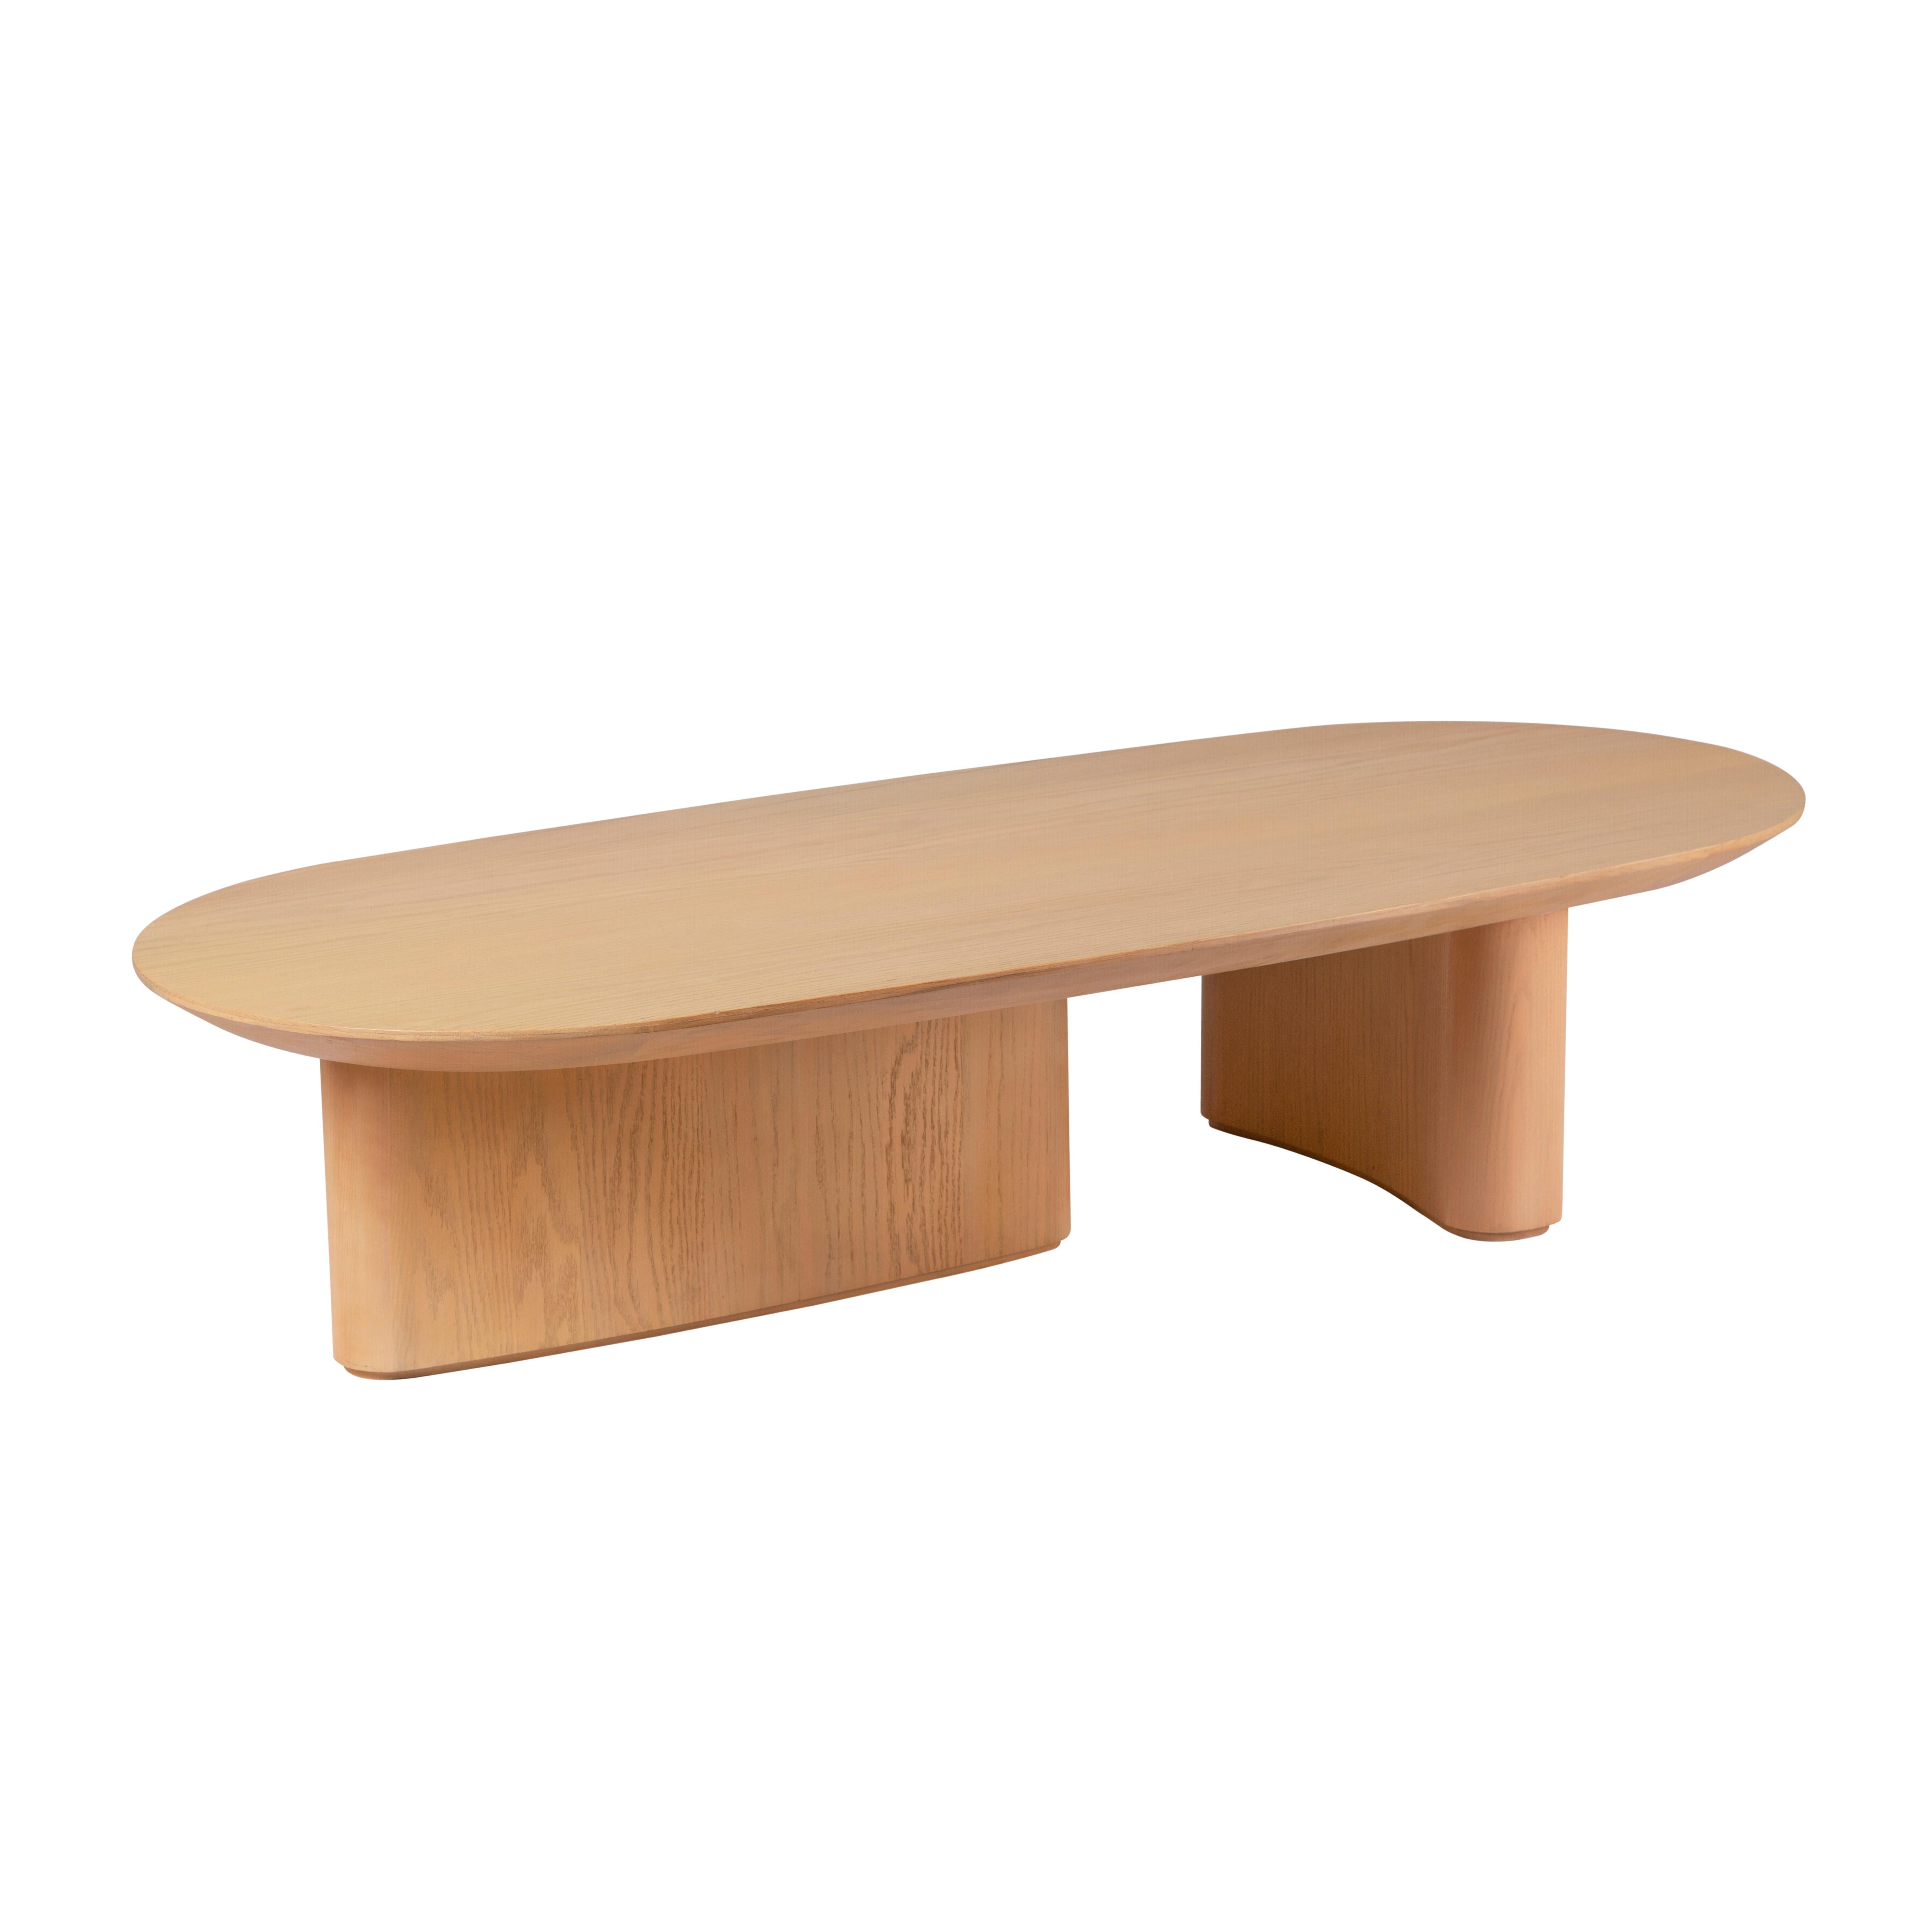 Organic Outdoor Oak Coffee Table Inspired by Oases Clay Furniture in Egypt